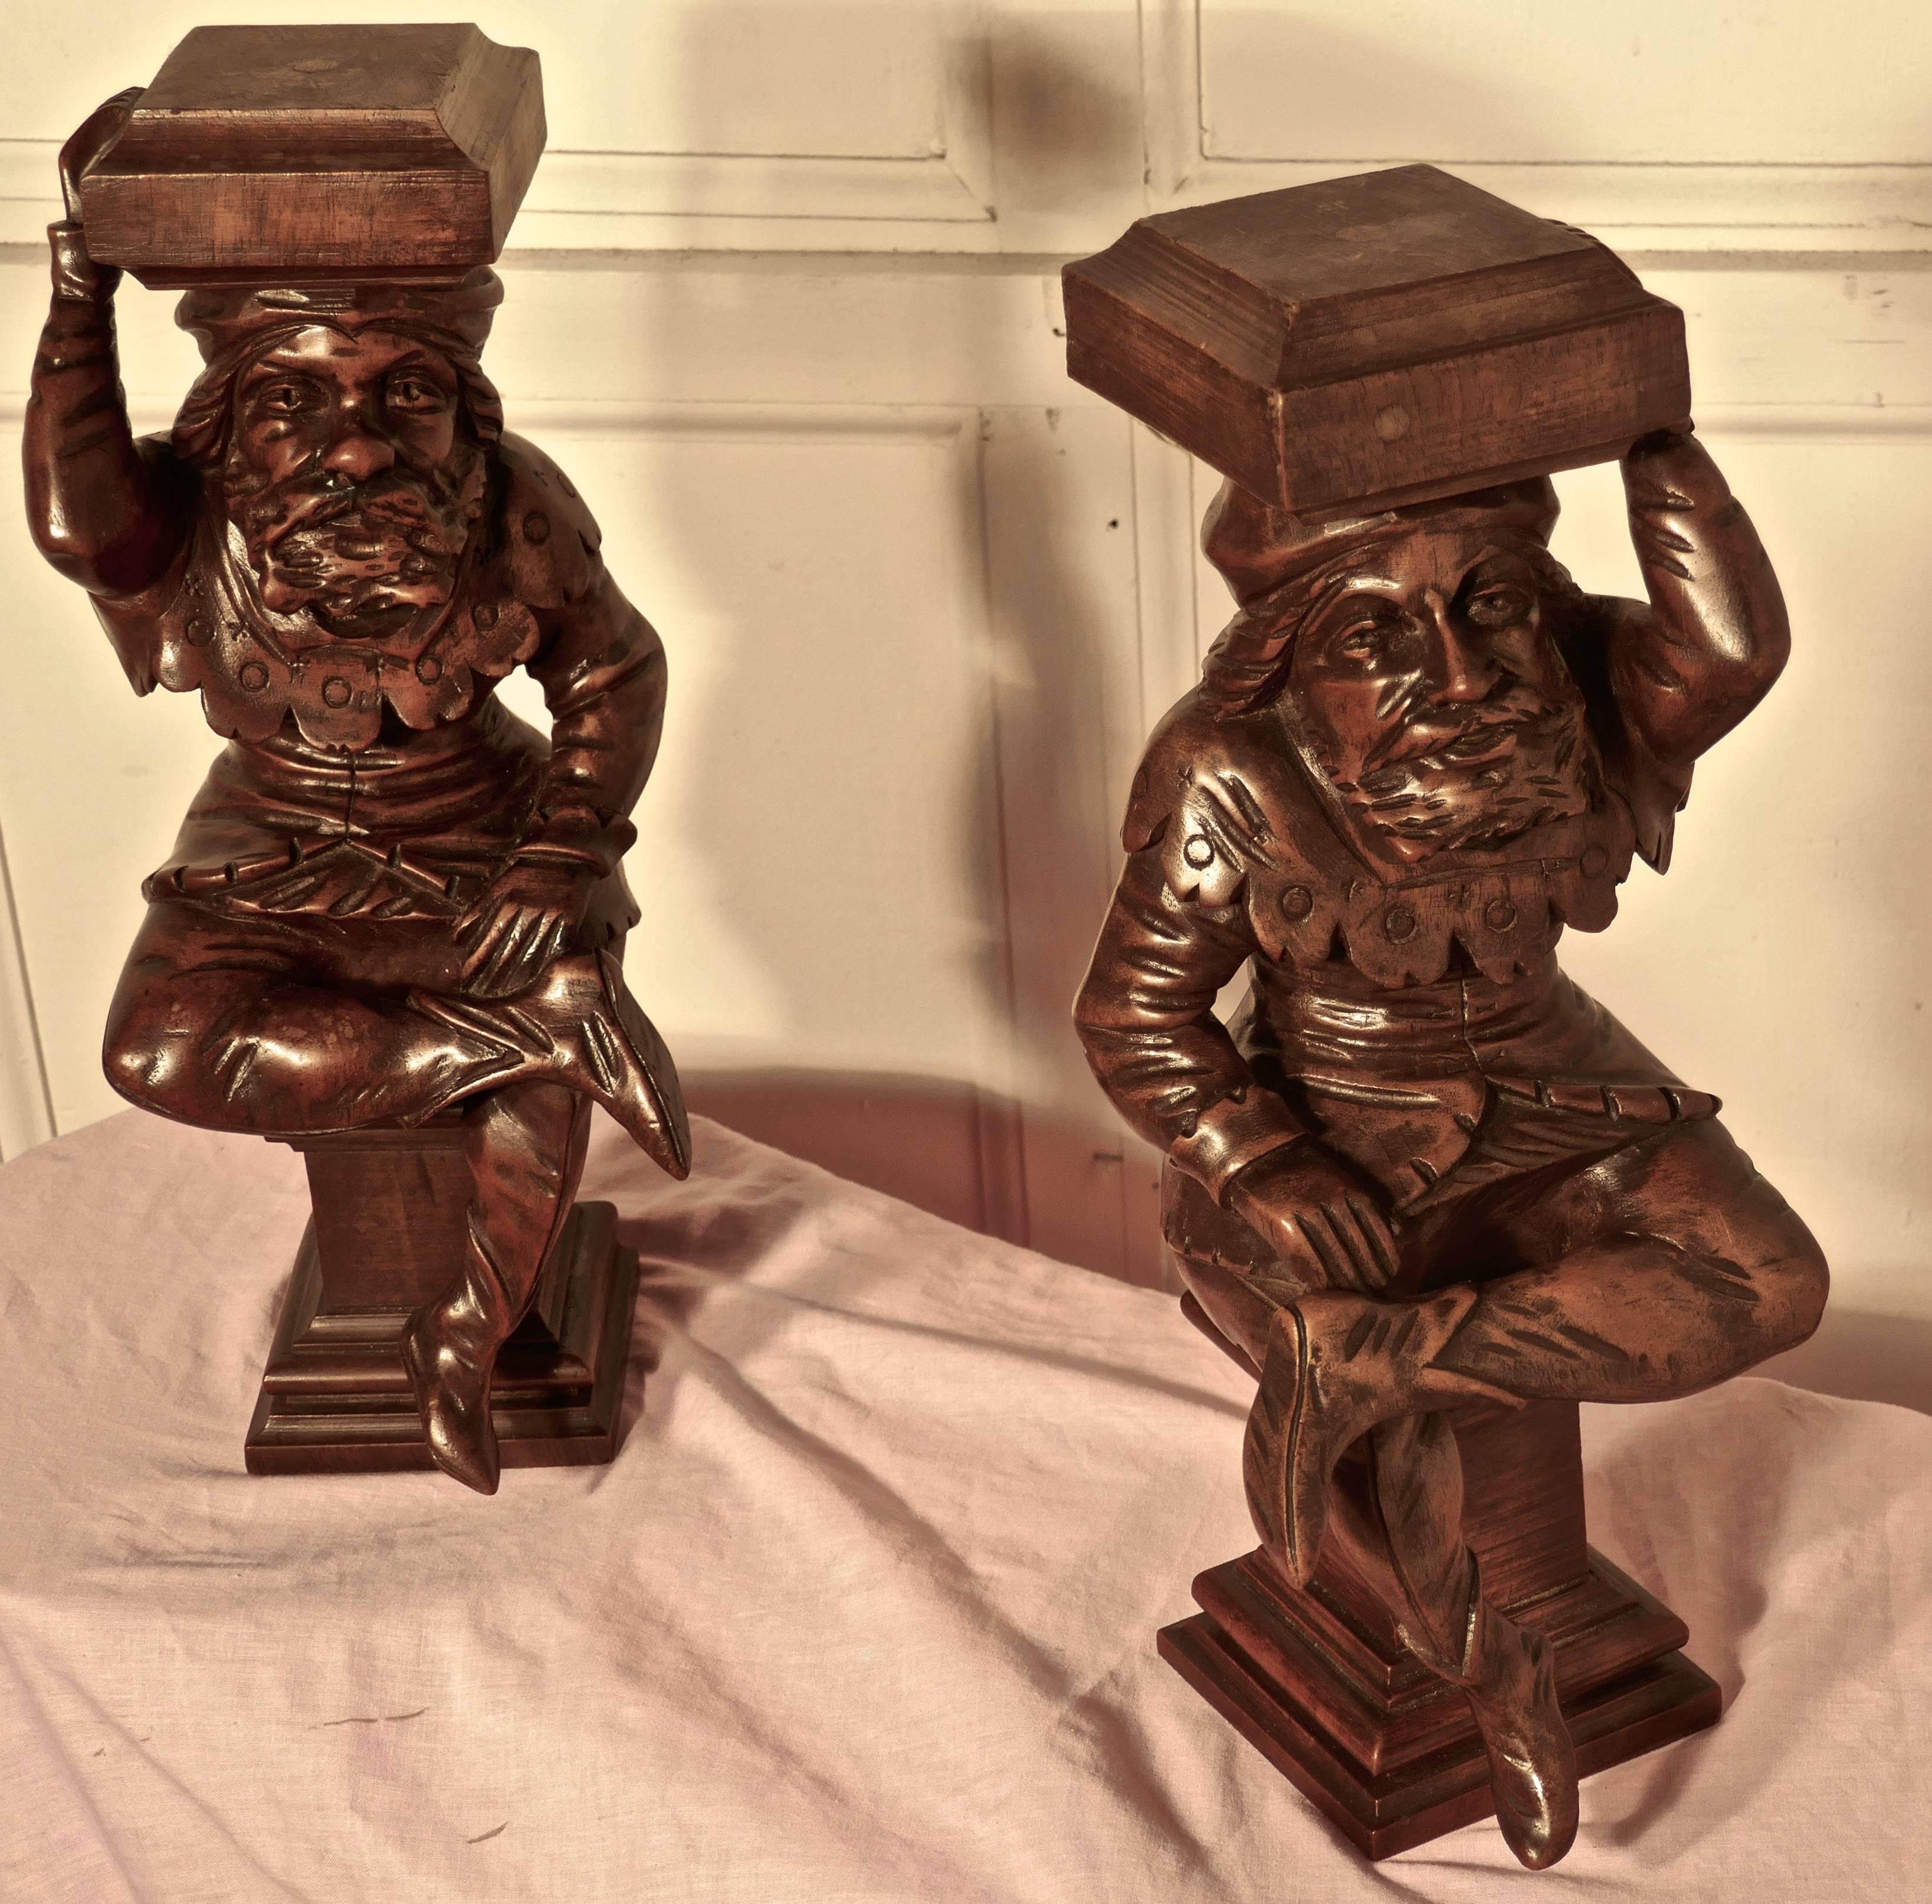 A very fine pair of early 19th century carved figures, of Court Jesters

These bearded gentlemen have been superbly carved in the finest detail, they original came from a piece of early 19th Century Furniture
Both the characters have finely detailed